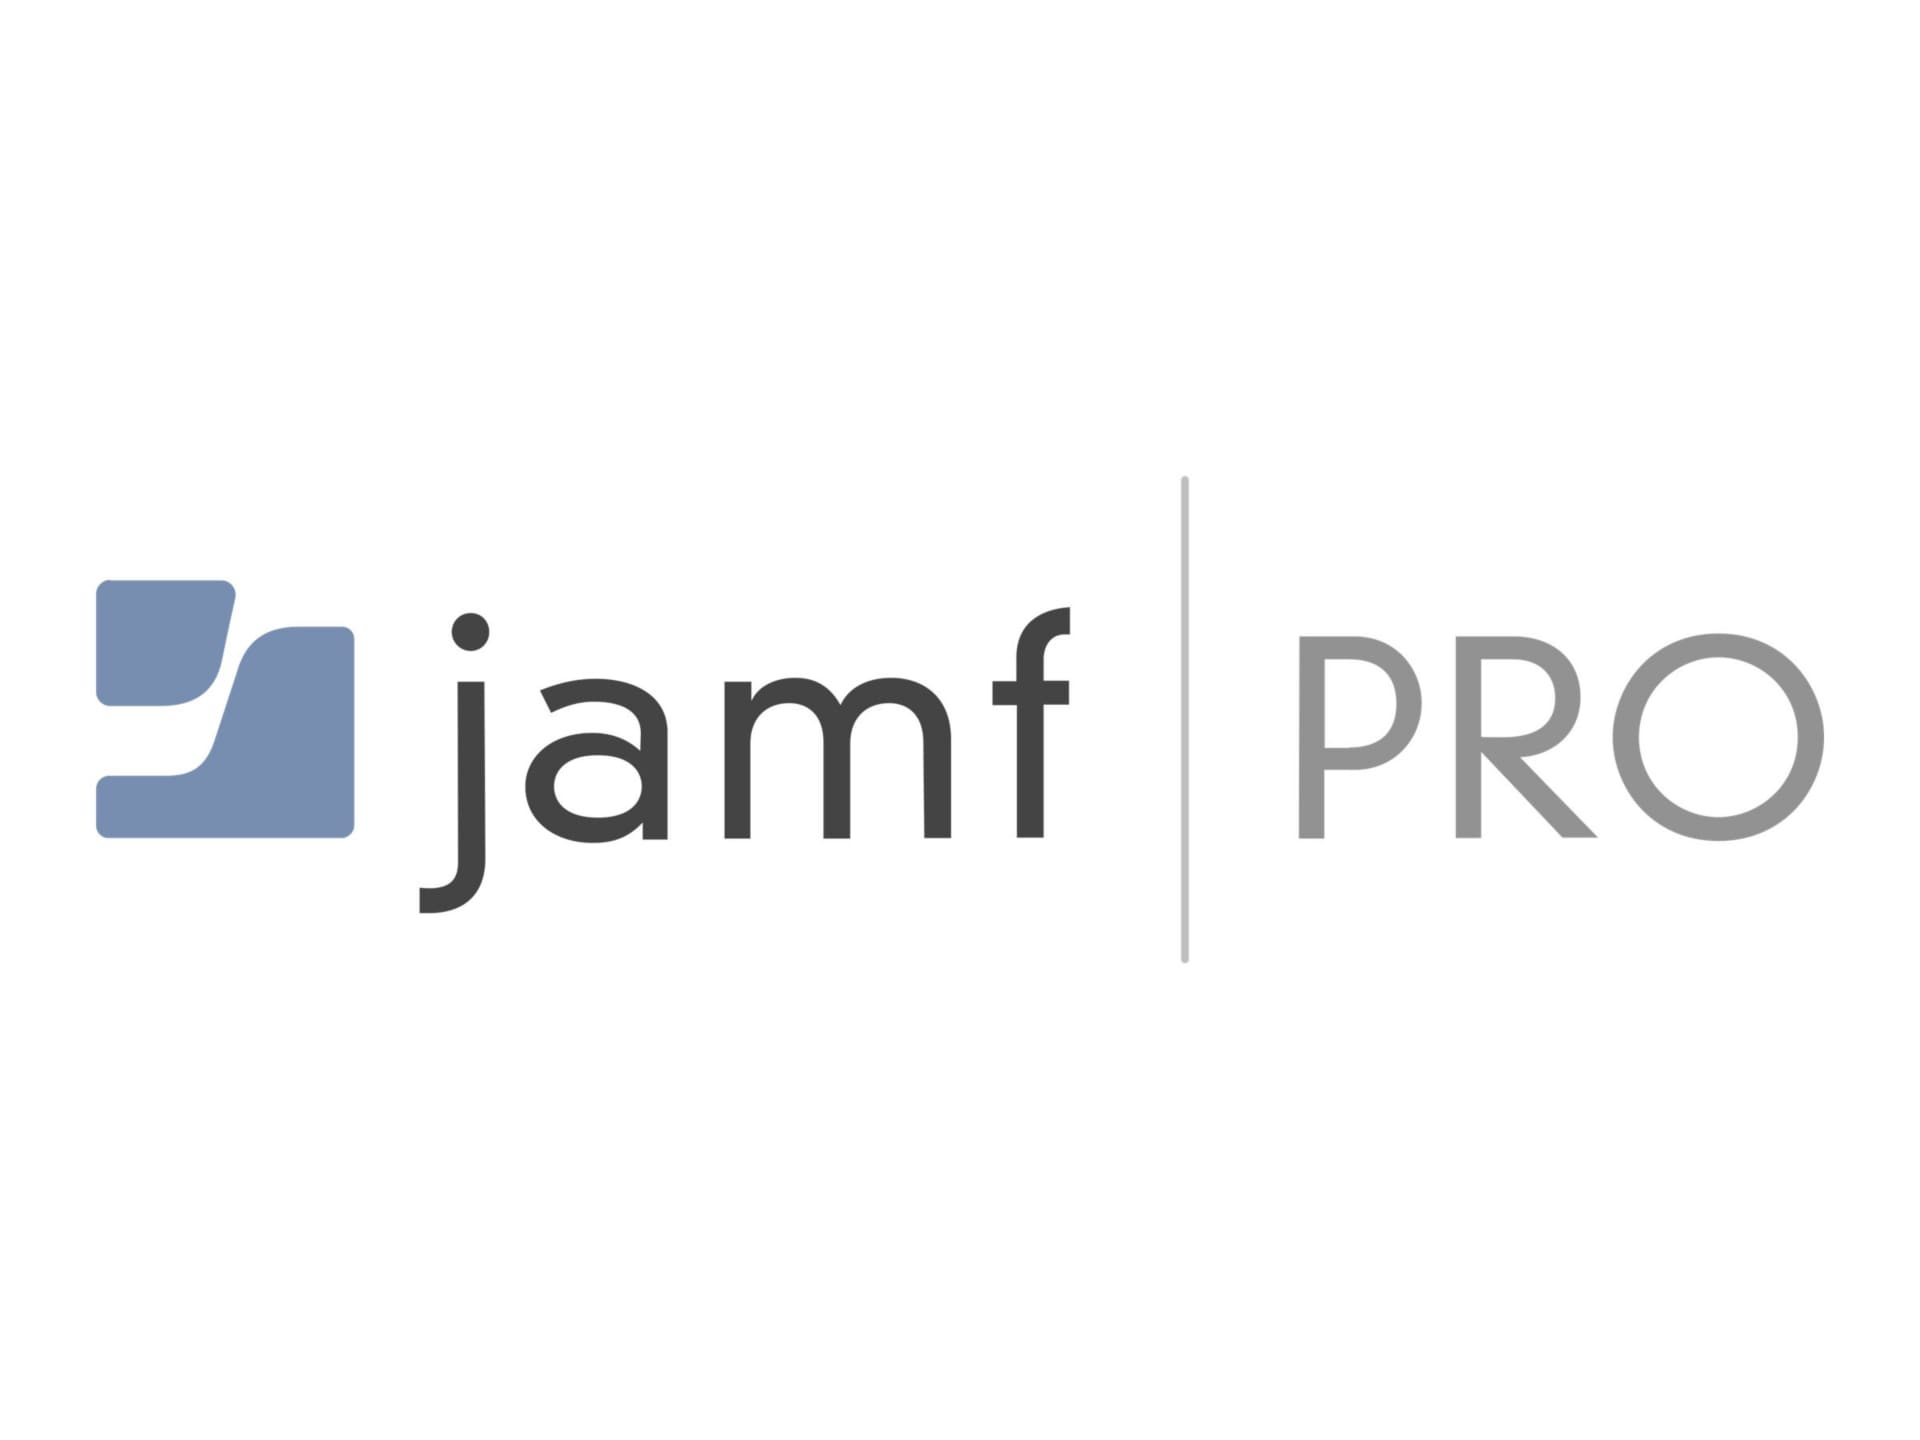 JAMF PRO with Jamf Cloud for MacOS - subscription license renewal (annual) - 1 device